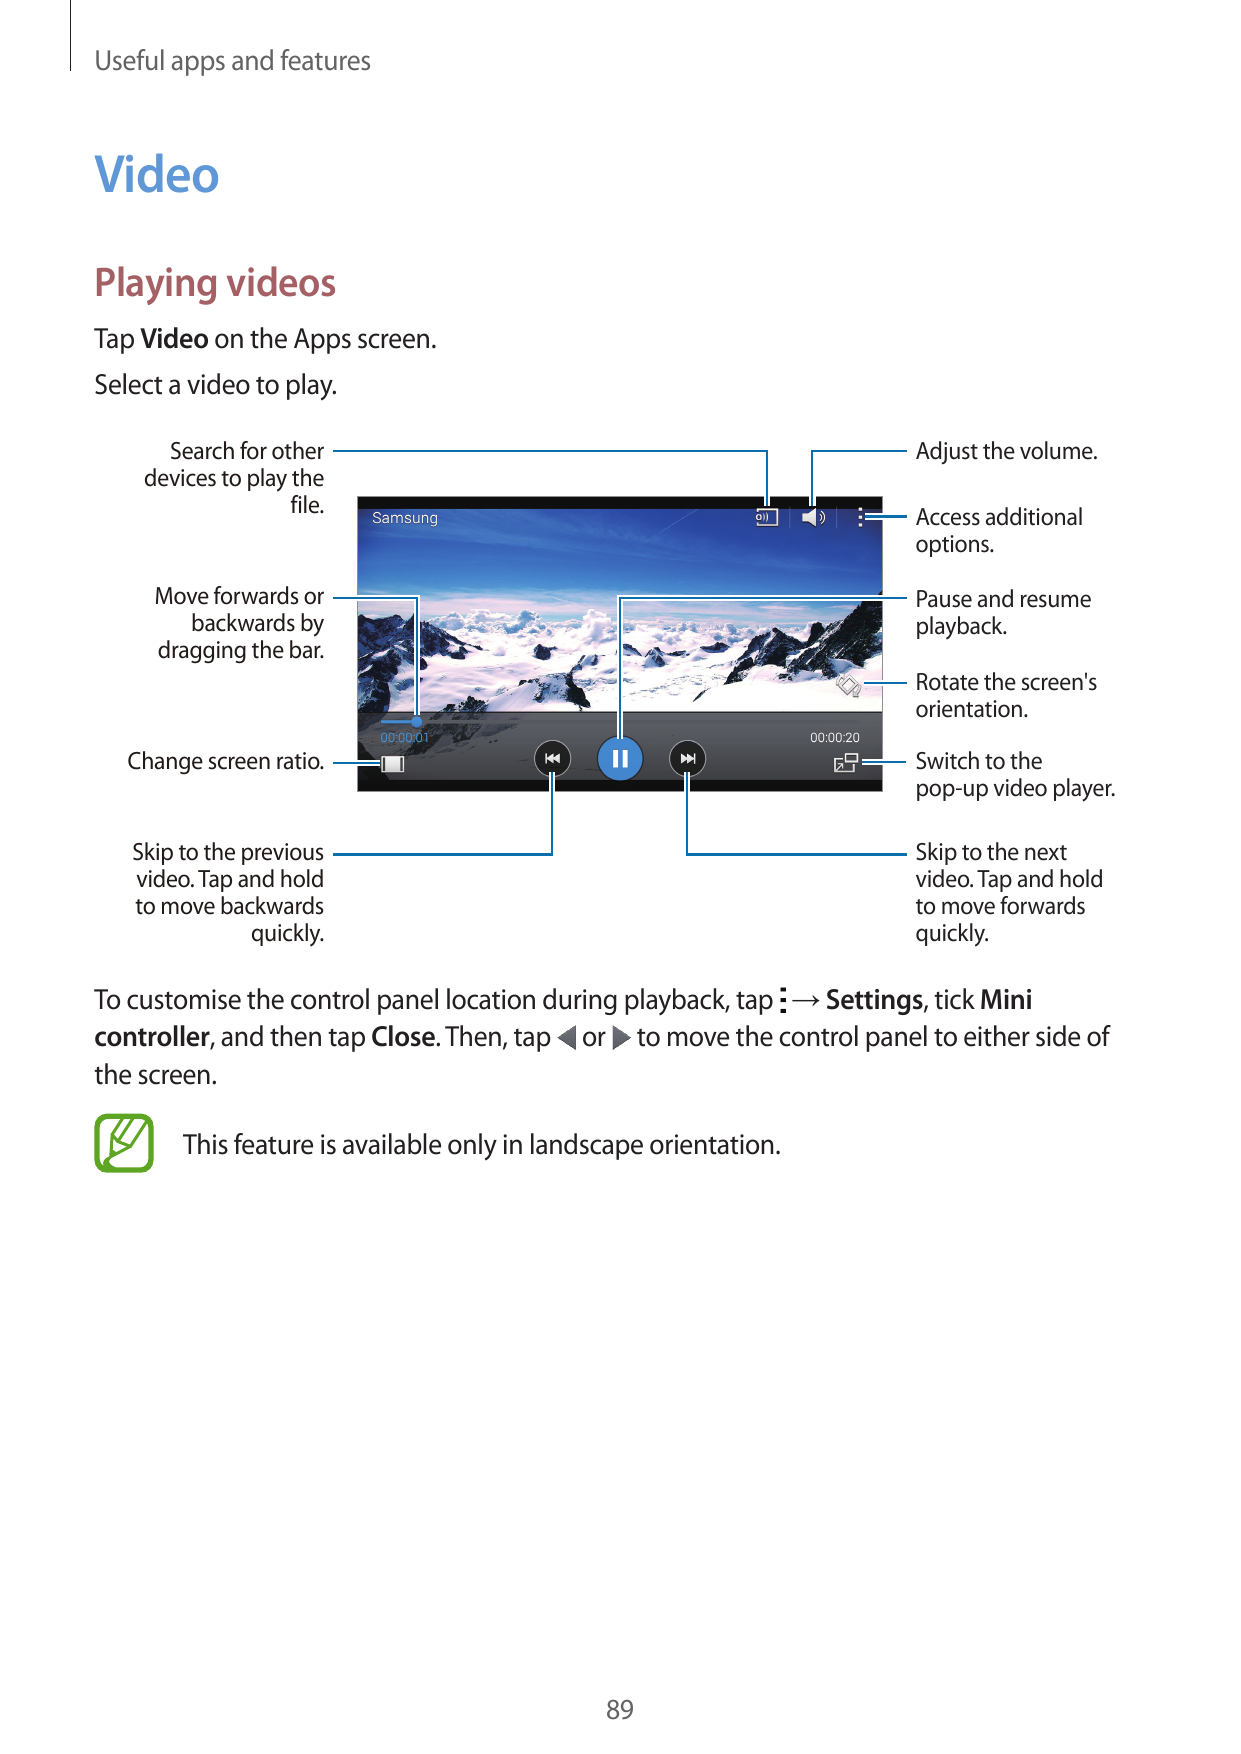 Useful apps and featuresVideoPlaying videosTap Video on the Apps screen.Select a video to play.Adjust the volume.Search for othe